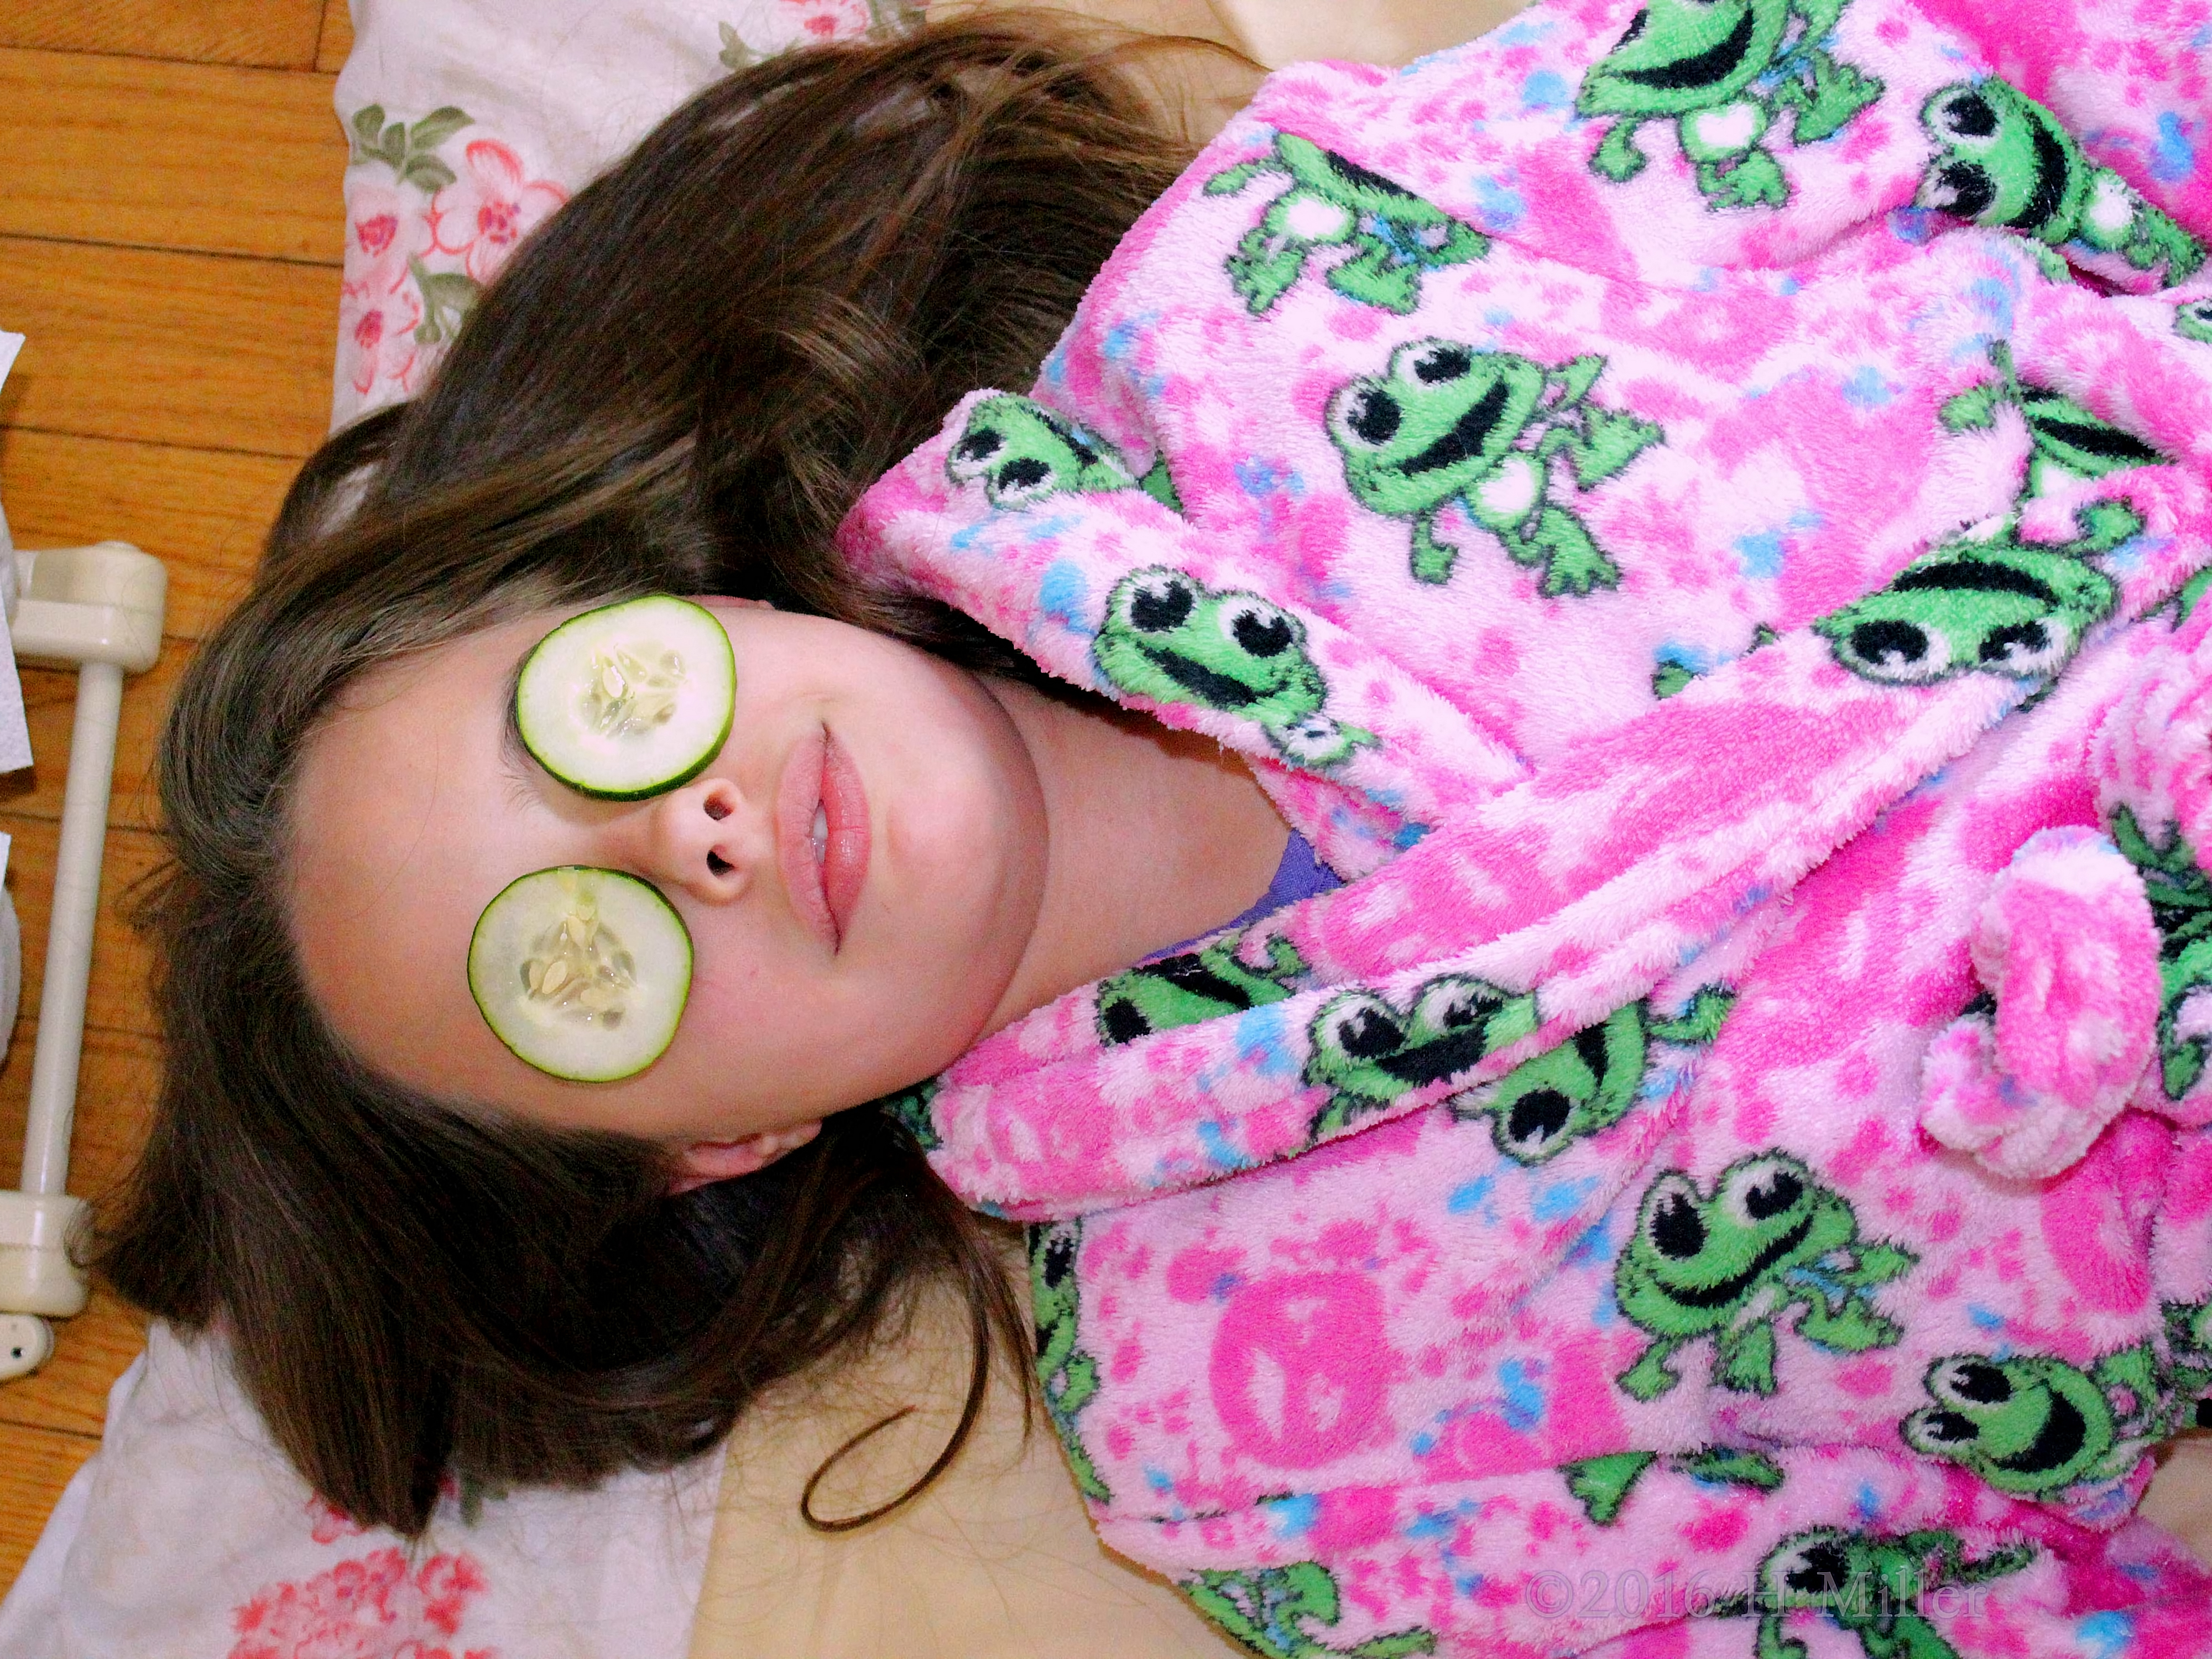 Cucumbers To Refresh Her Eyes During The Kids Facial!